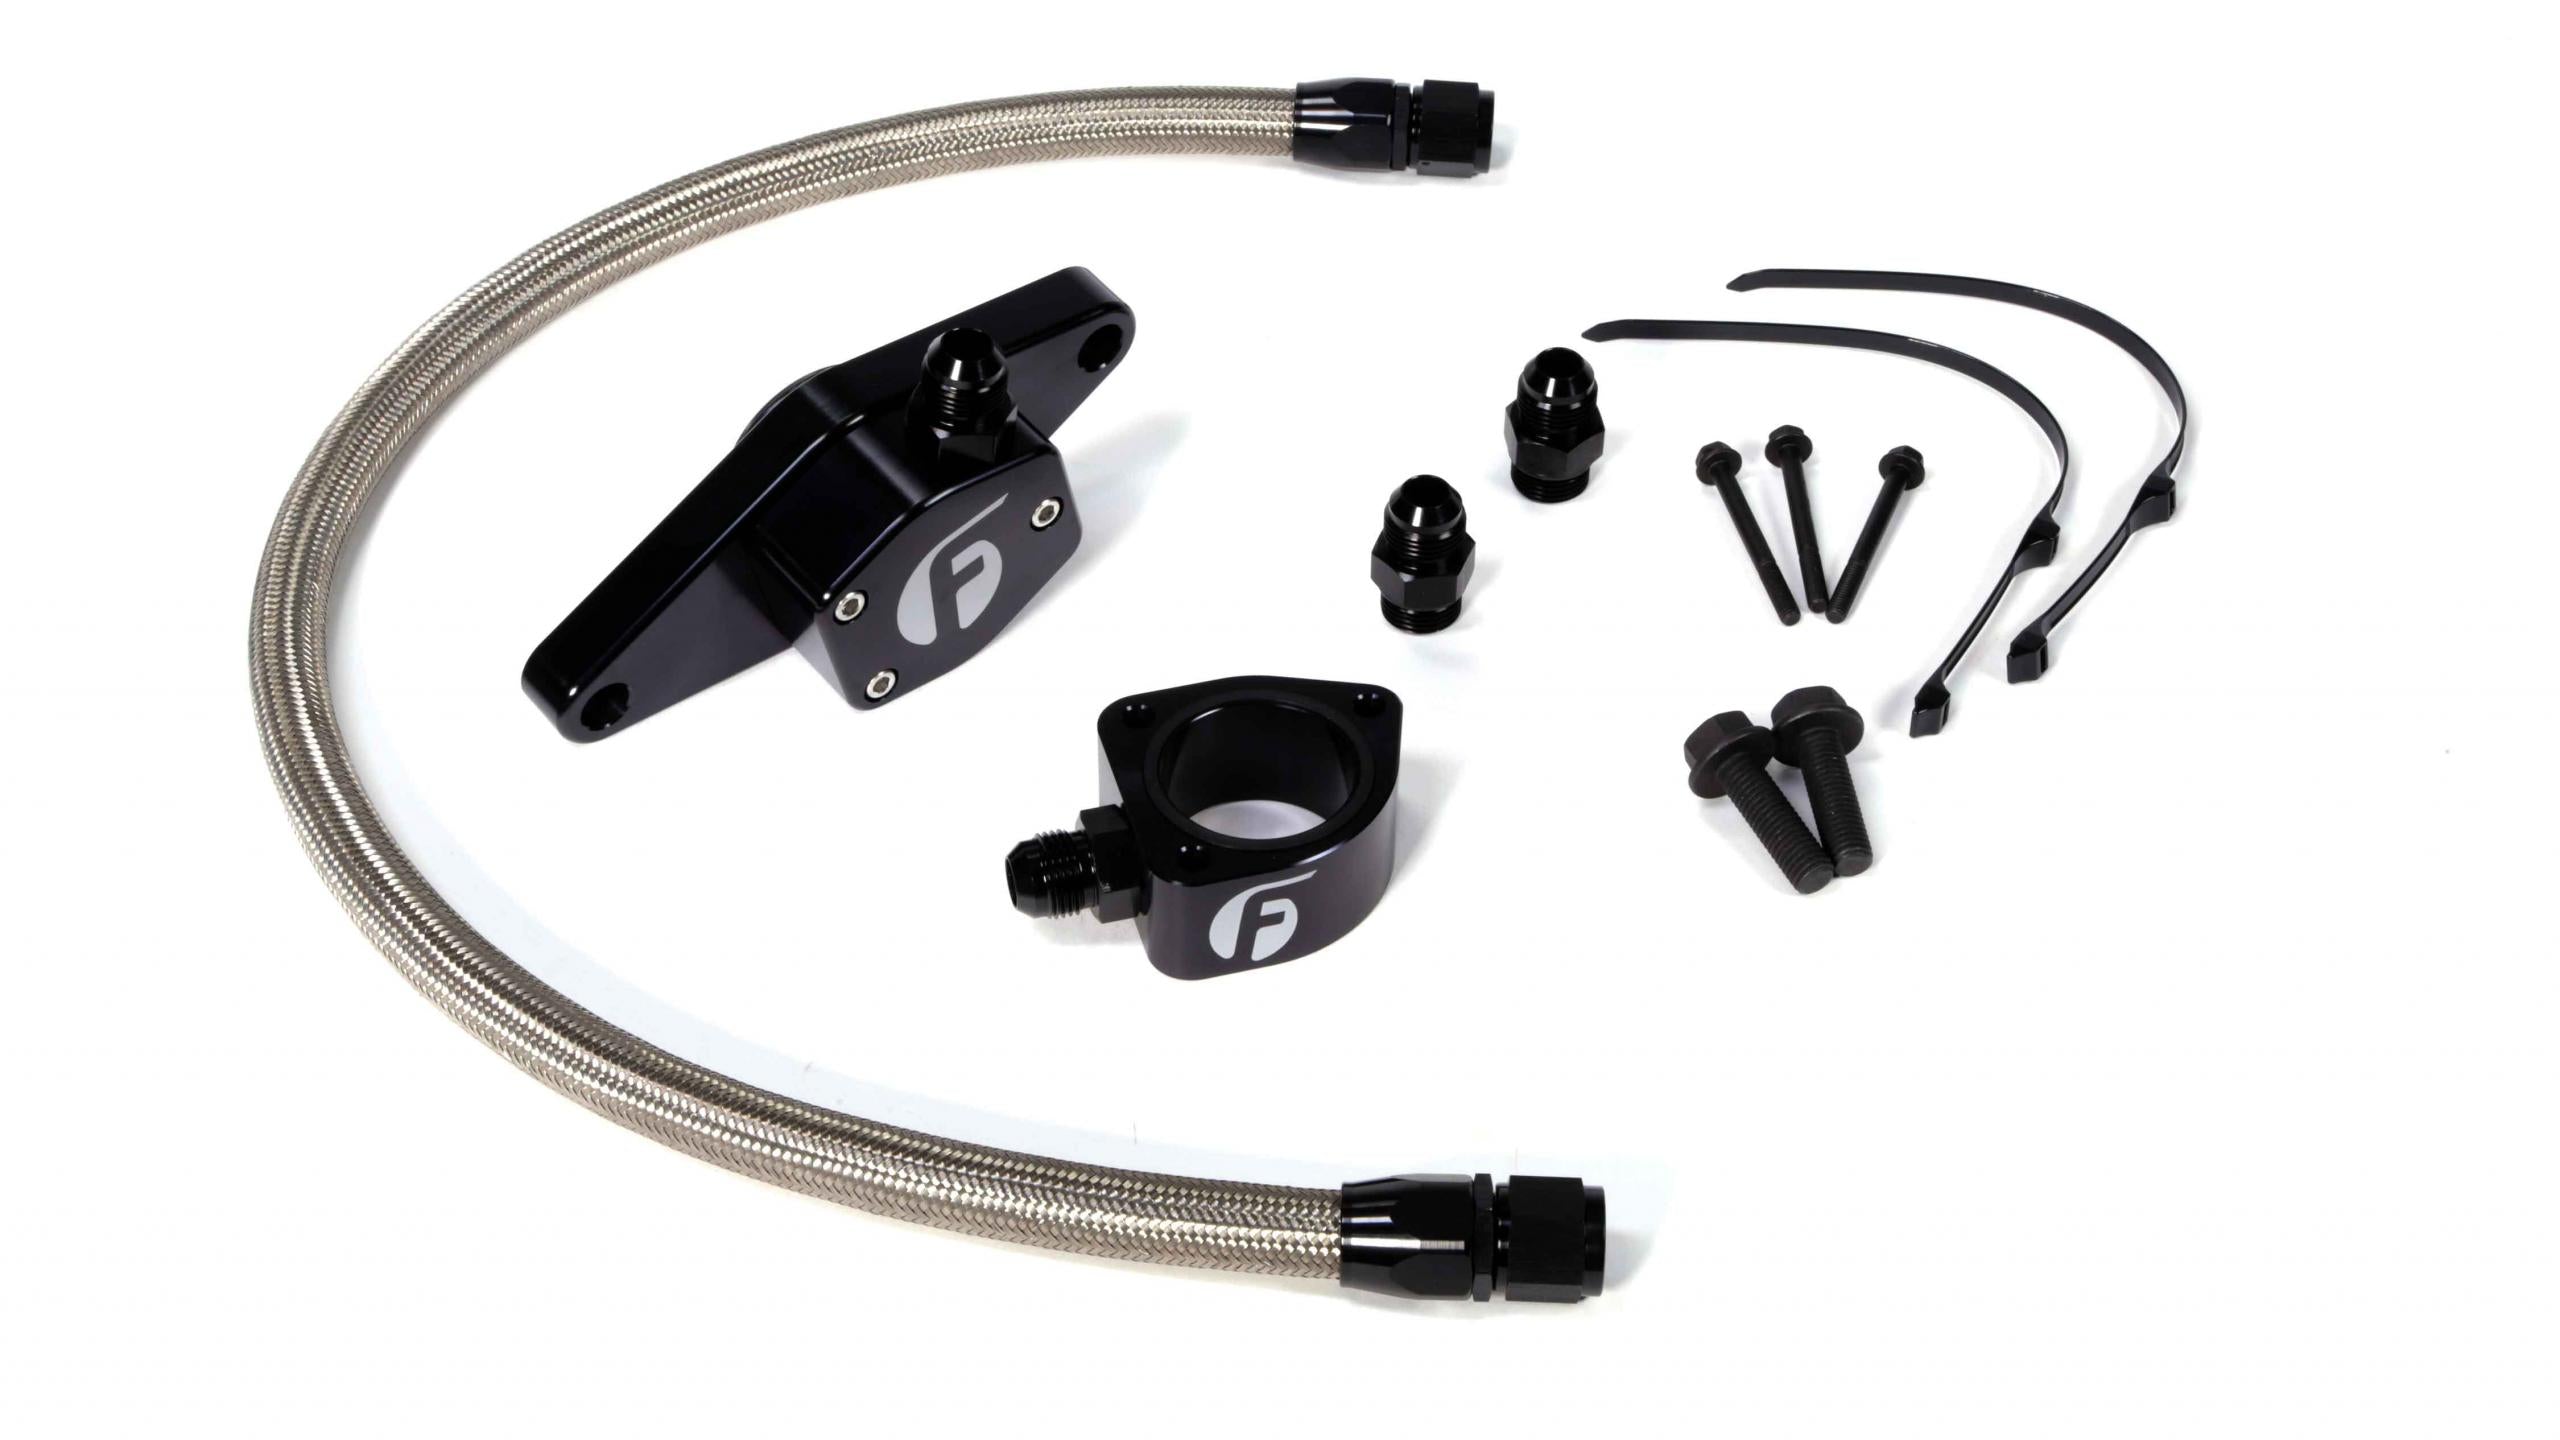 Cummins Coolant Bypass Kit VP 98.5-02 with Stainless Steel Braided Line Fleece Performance